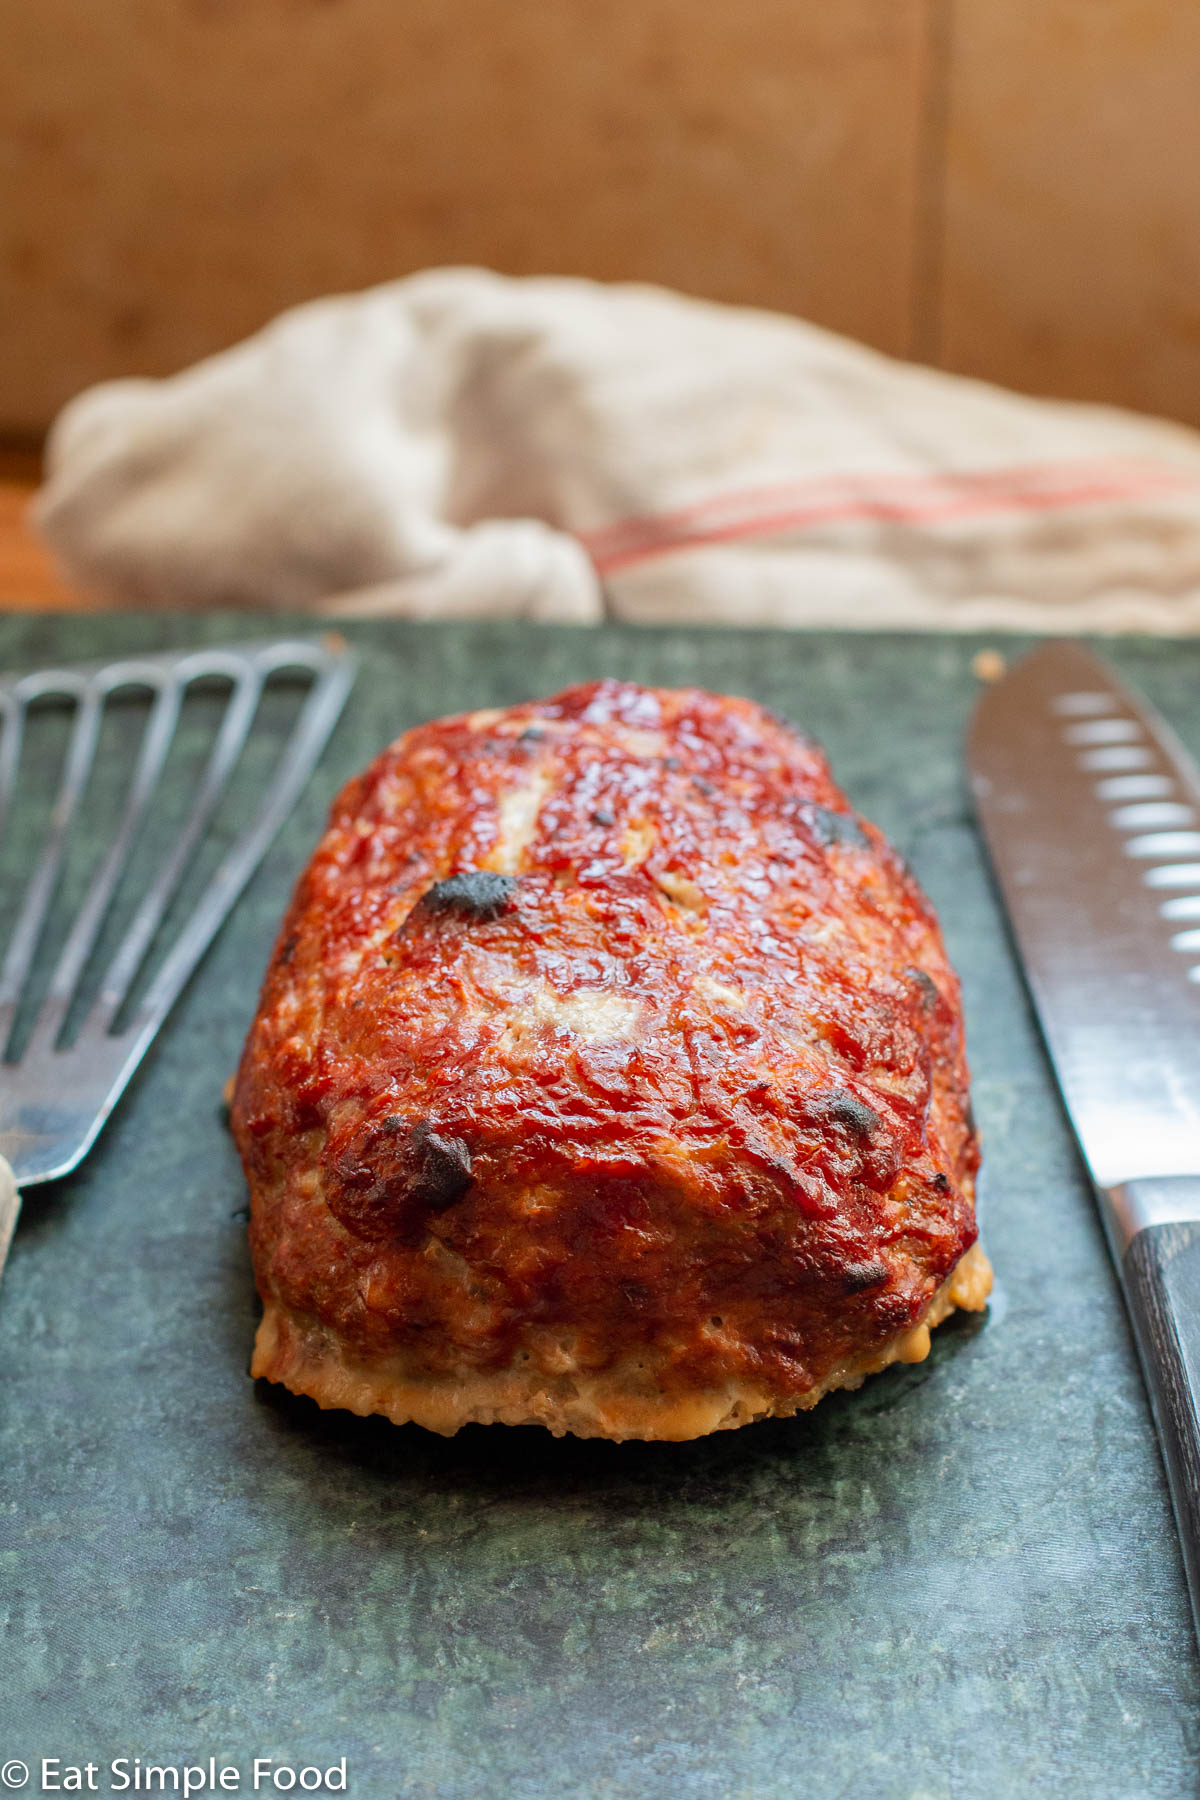 Side view of turkey meatloaf with a brown red ketchup glaze. Knife and metal spatula on the side. White towel in the background.